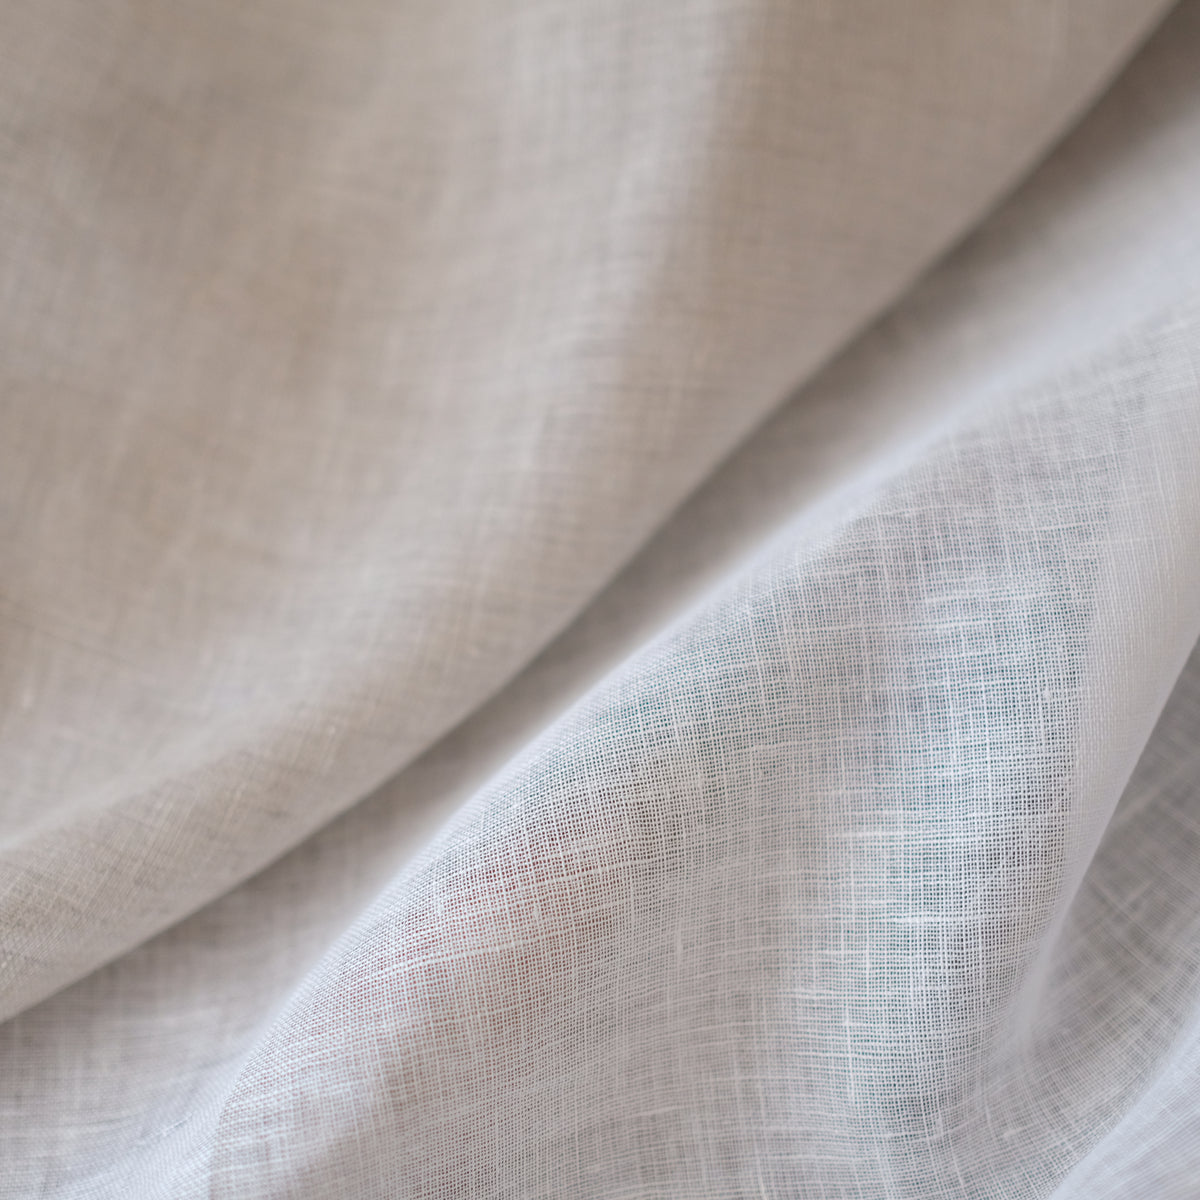 Embroidery Fabric by the Yard, Linen Blend Embroidery Fabric, Cotton-linen  Fabric, Embroidery Cloth, Linen Essex 